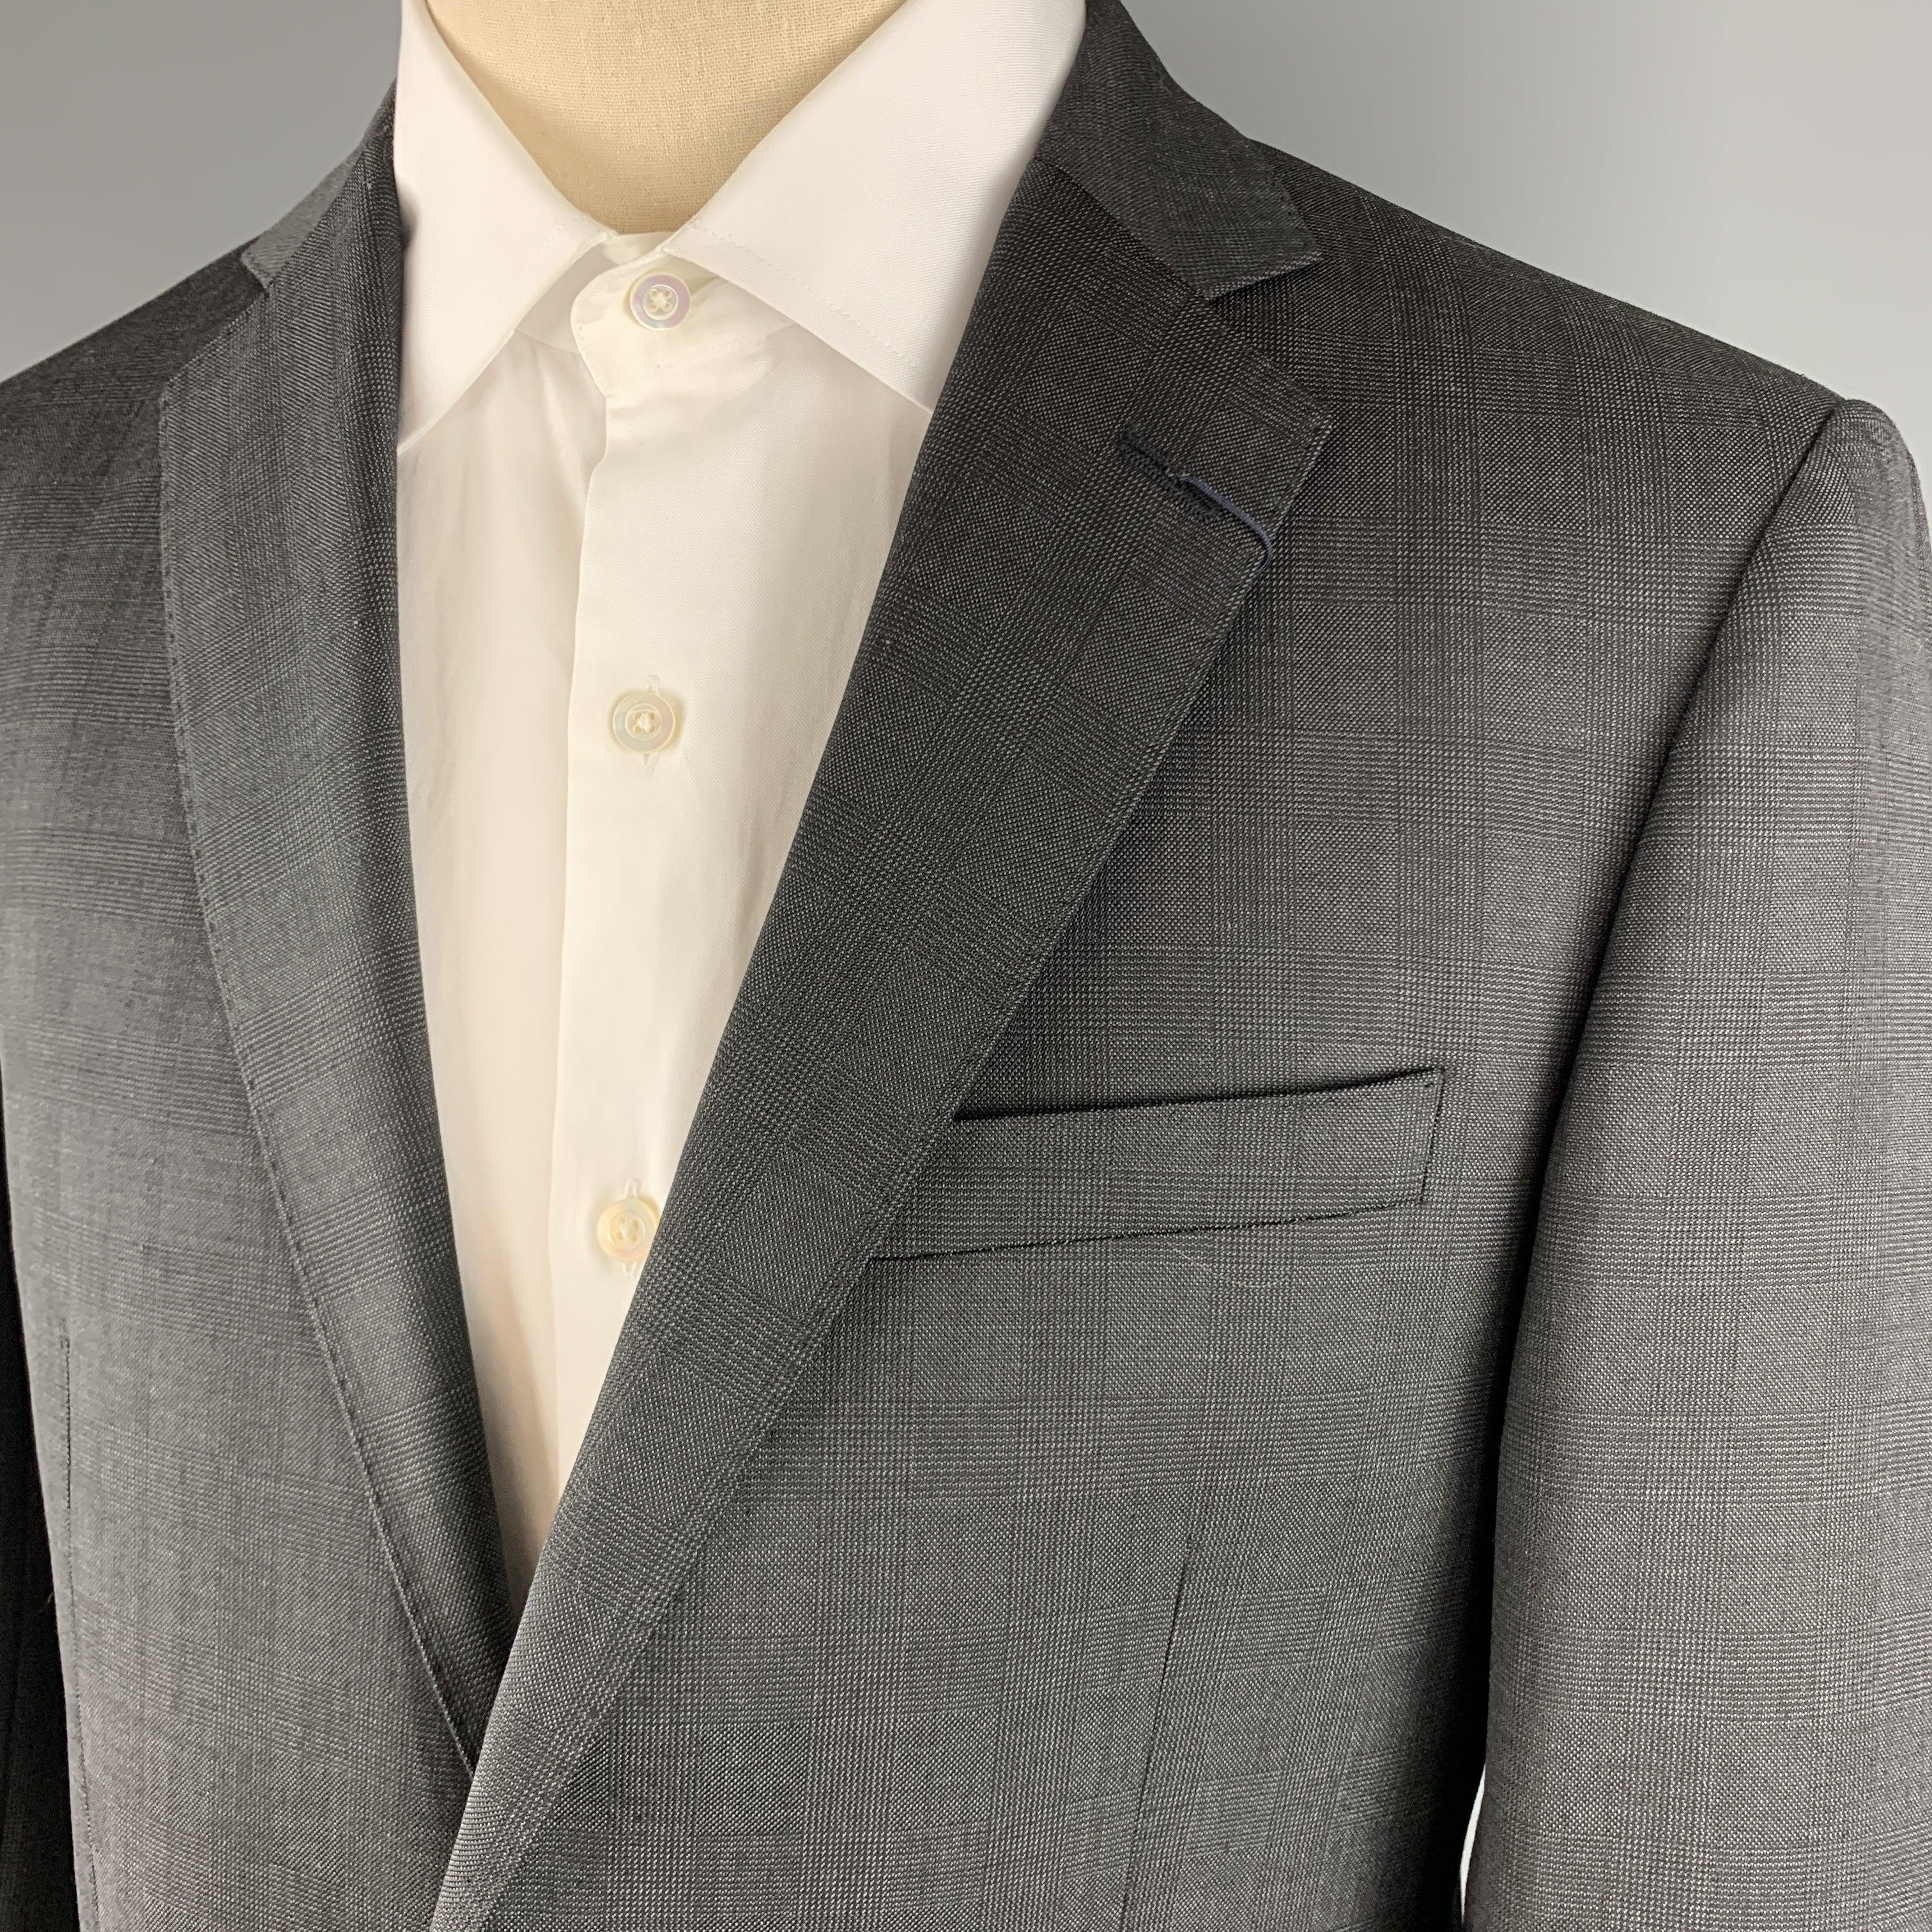 ELIE TAHARI Size 40 Charcoal Glenplaid Wool Notch Lapel Suit NWT In Excellent Condition For Sale In San Francisco, CA